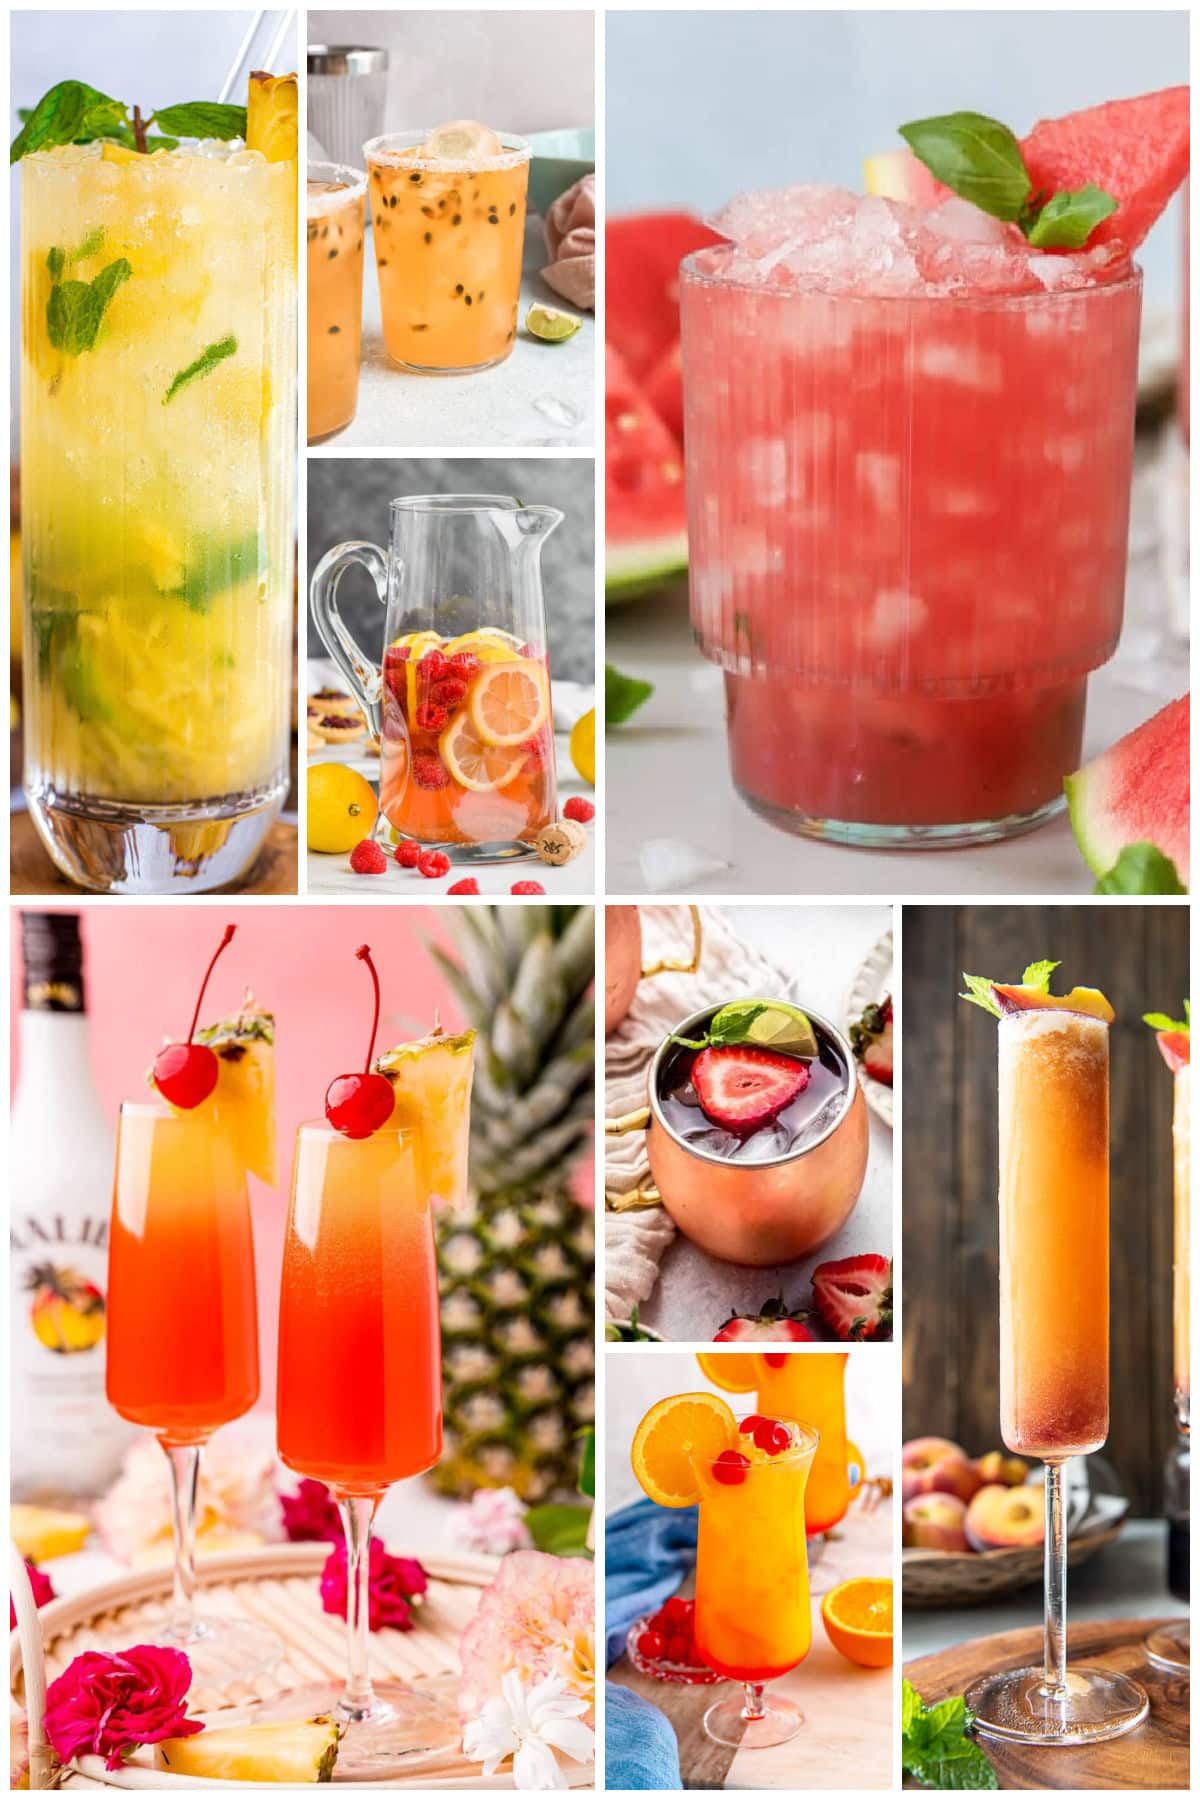 A group of festive drinks including a watermelon basil cocktail, a Hawaiian mimosa and a sparkling rose sangria.